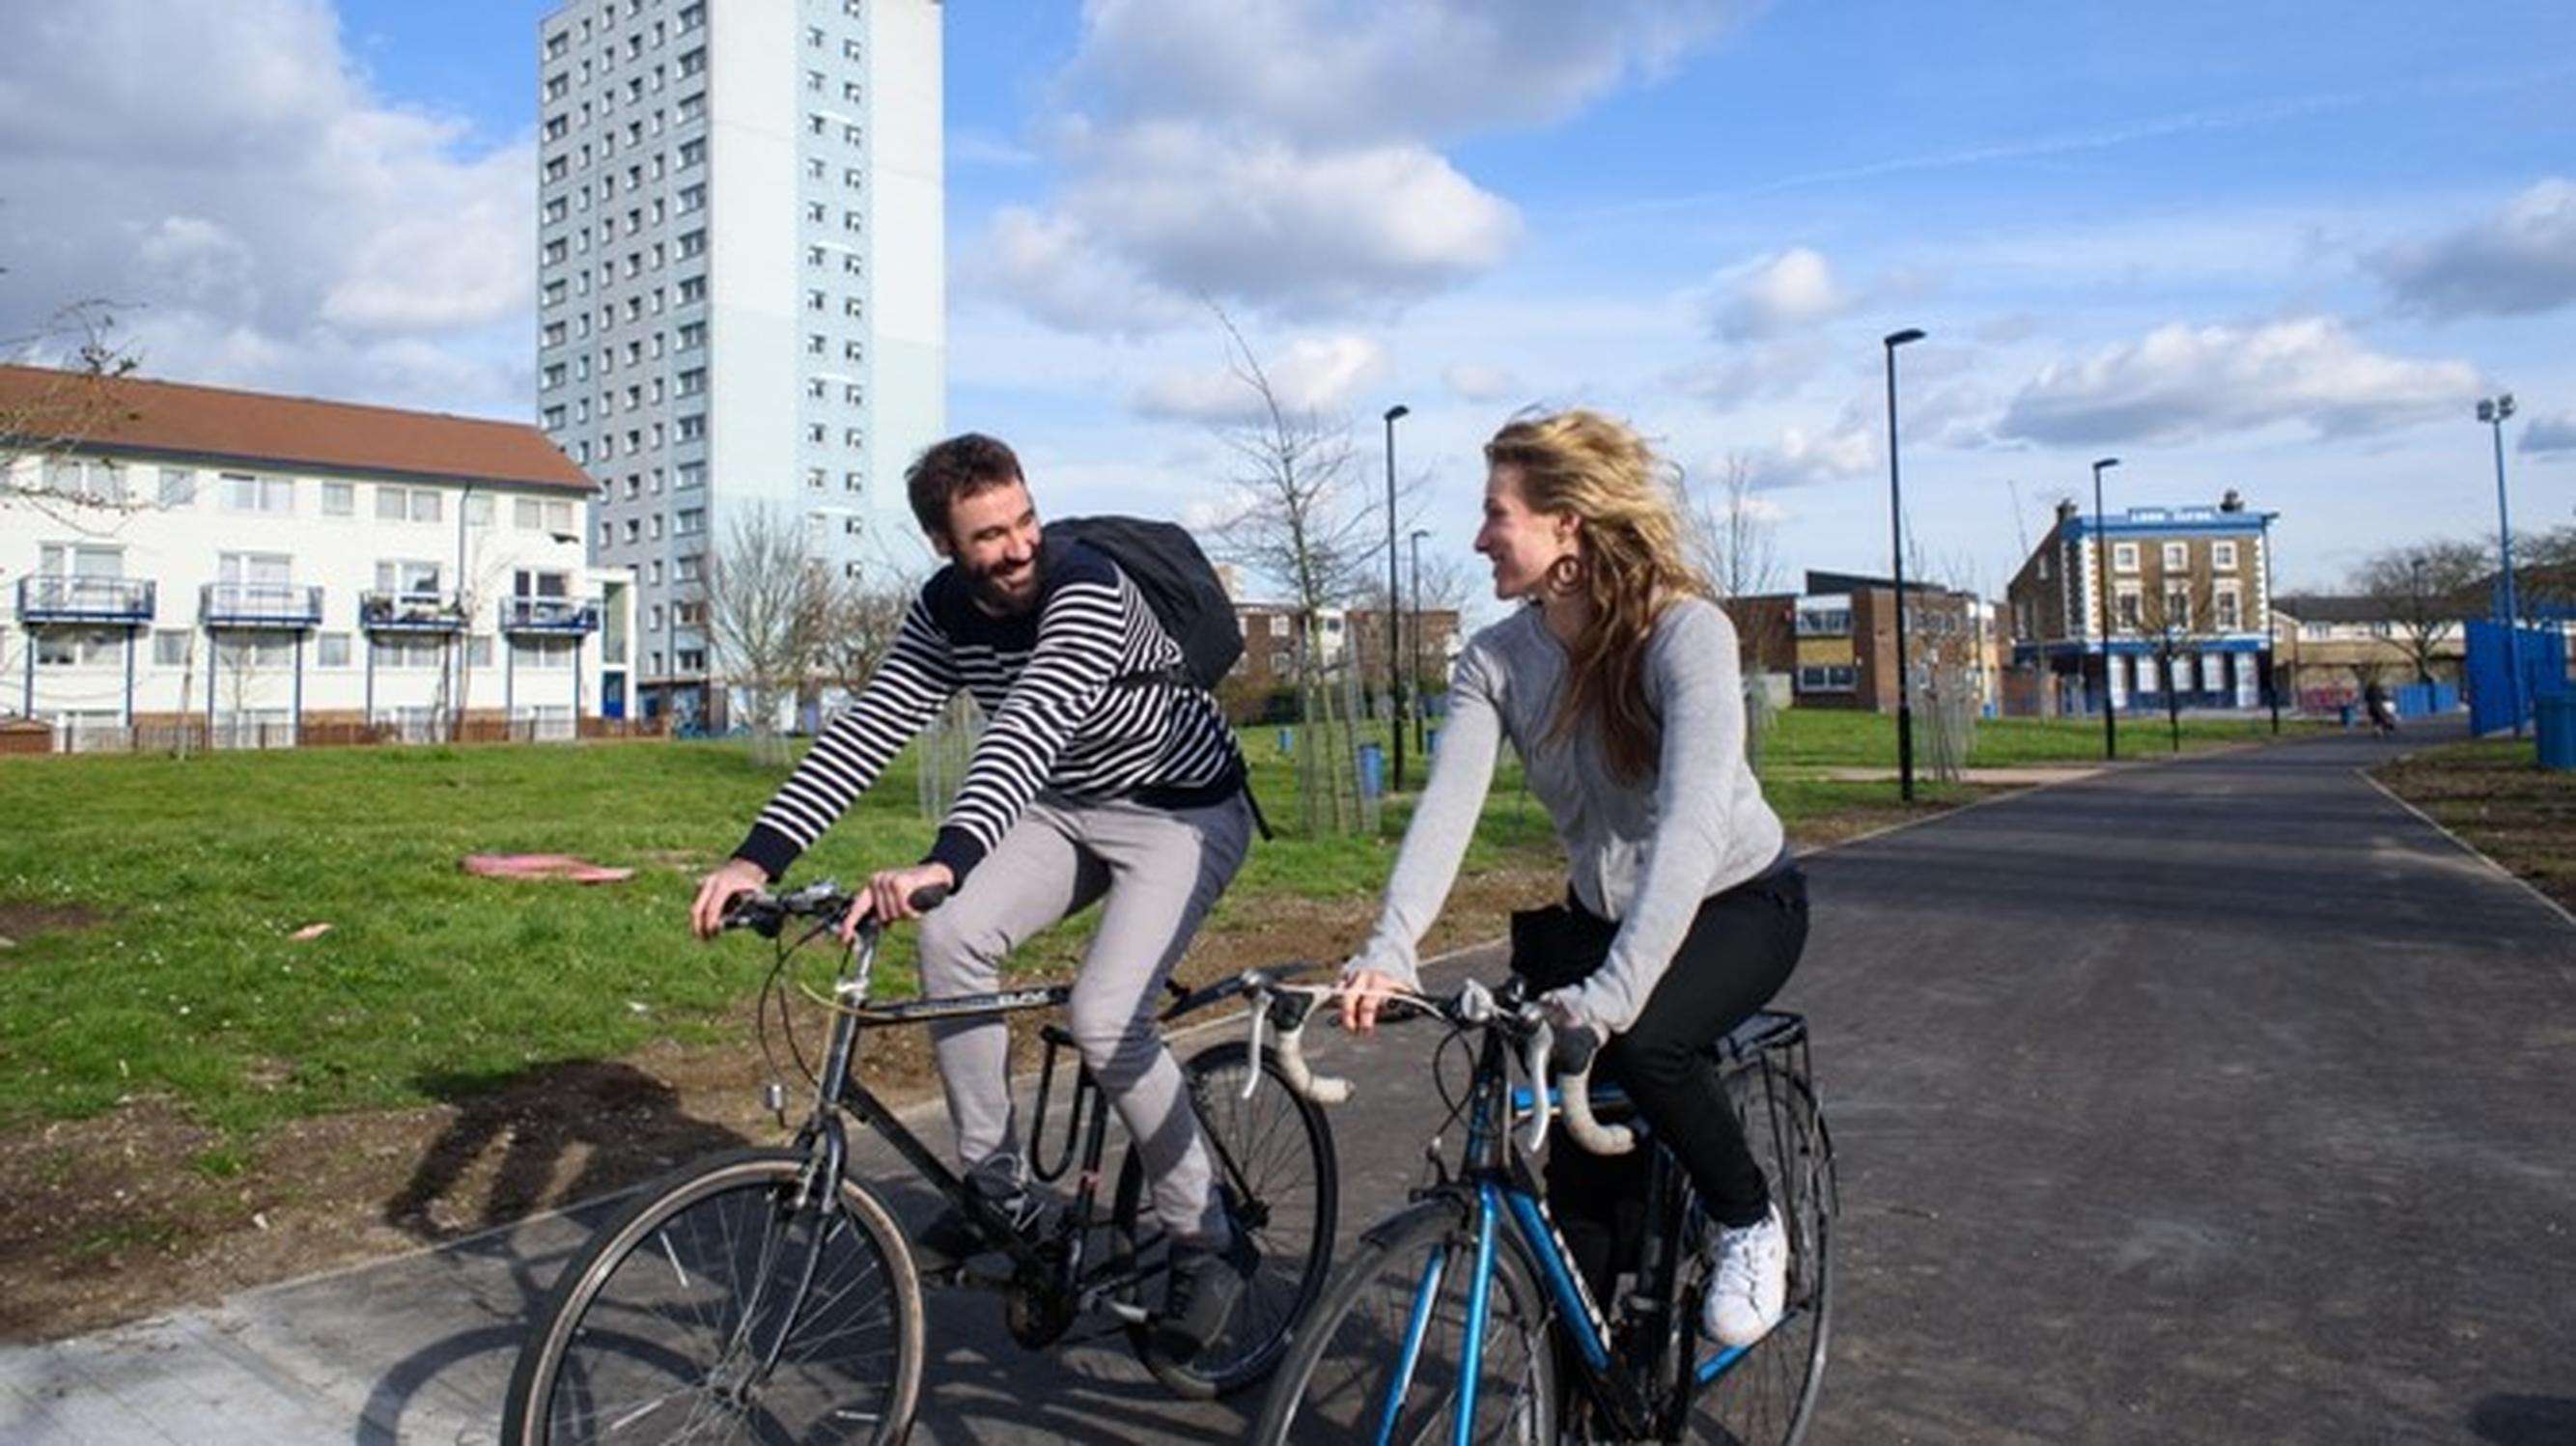 The National Cycle Network is managed by Sustrans